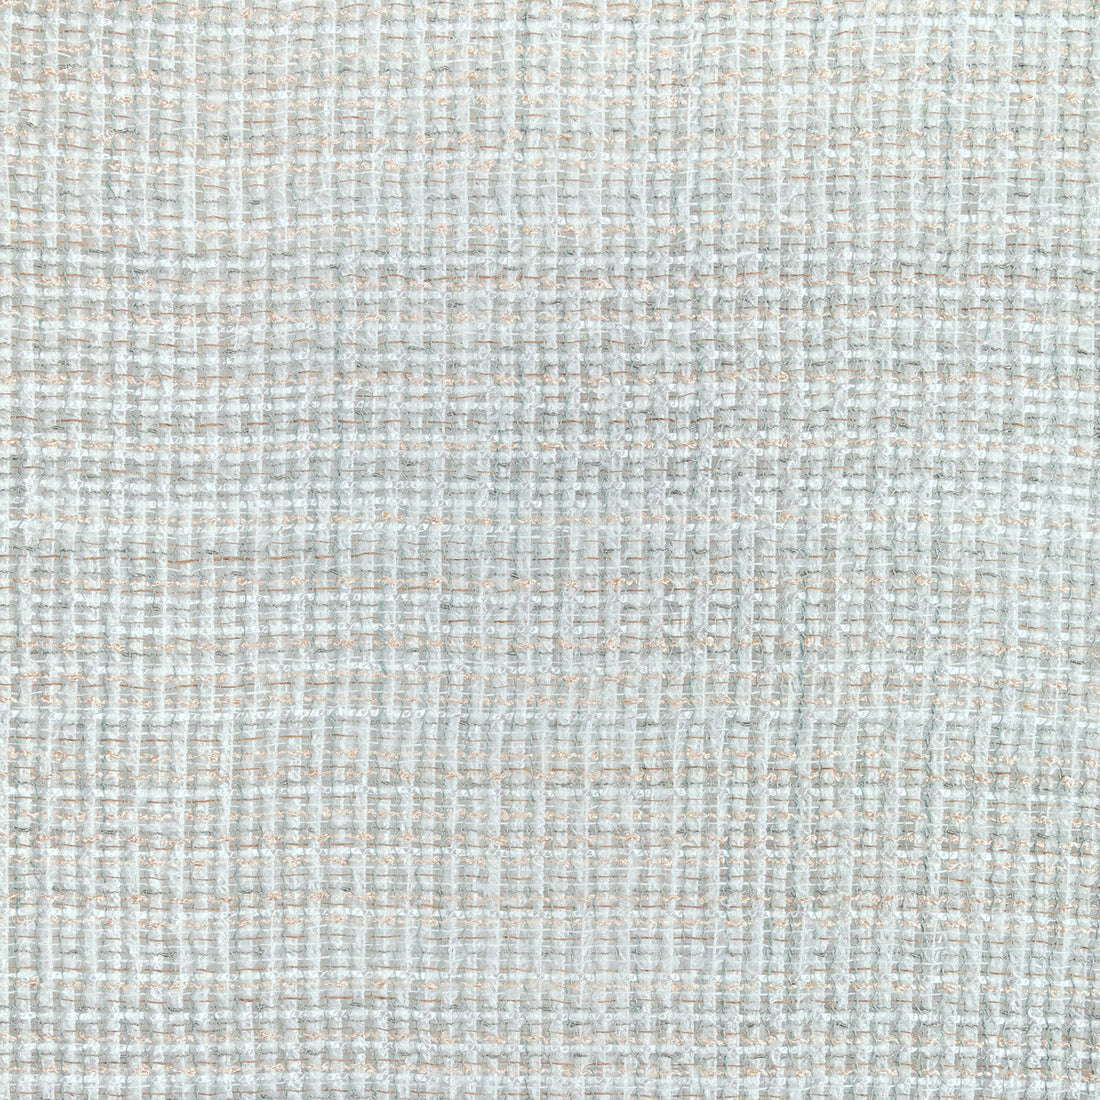 Soft Spoken fabric in mist color - pattern 4889.11.0 - by Kravet Couture in the Modern Luxe III collection